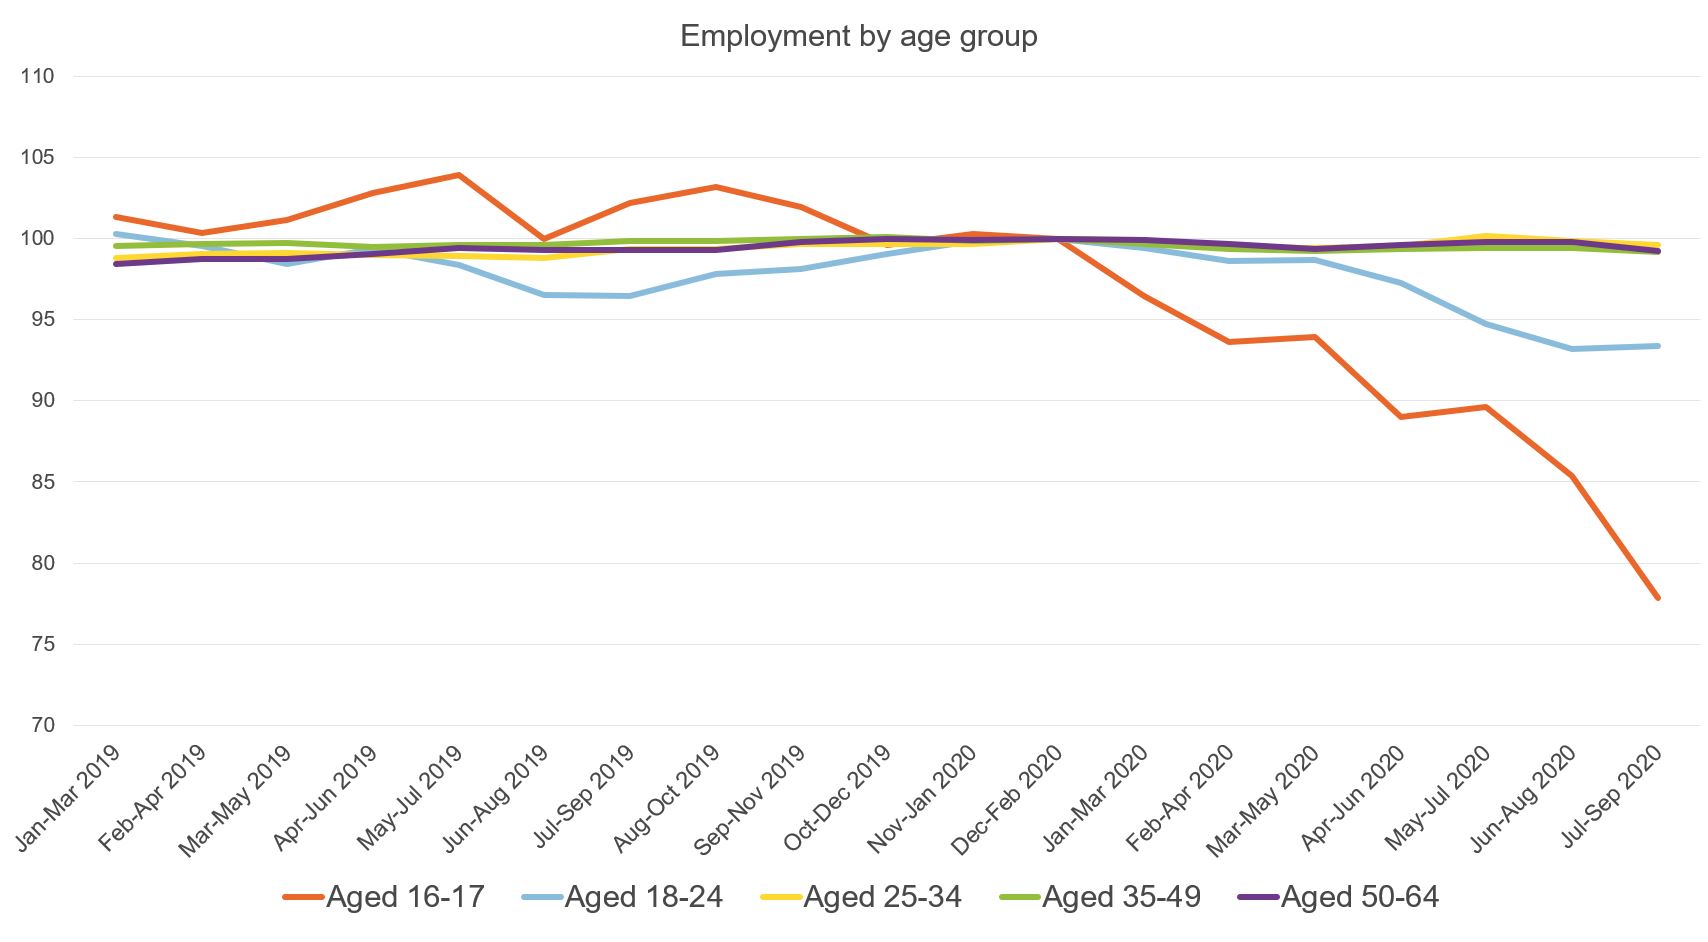 Figure showing employment by age group